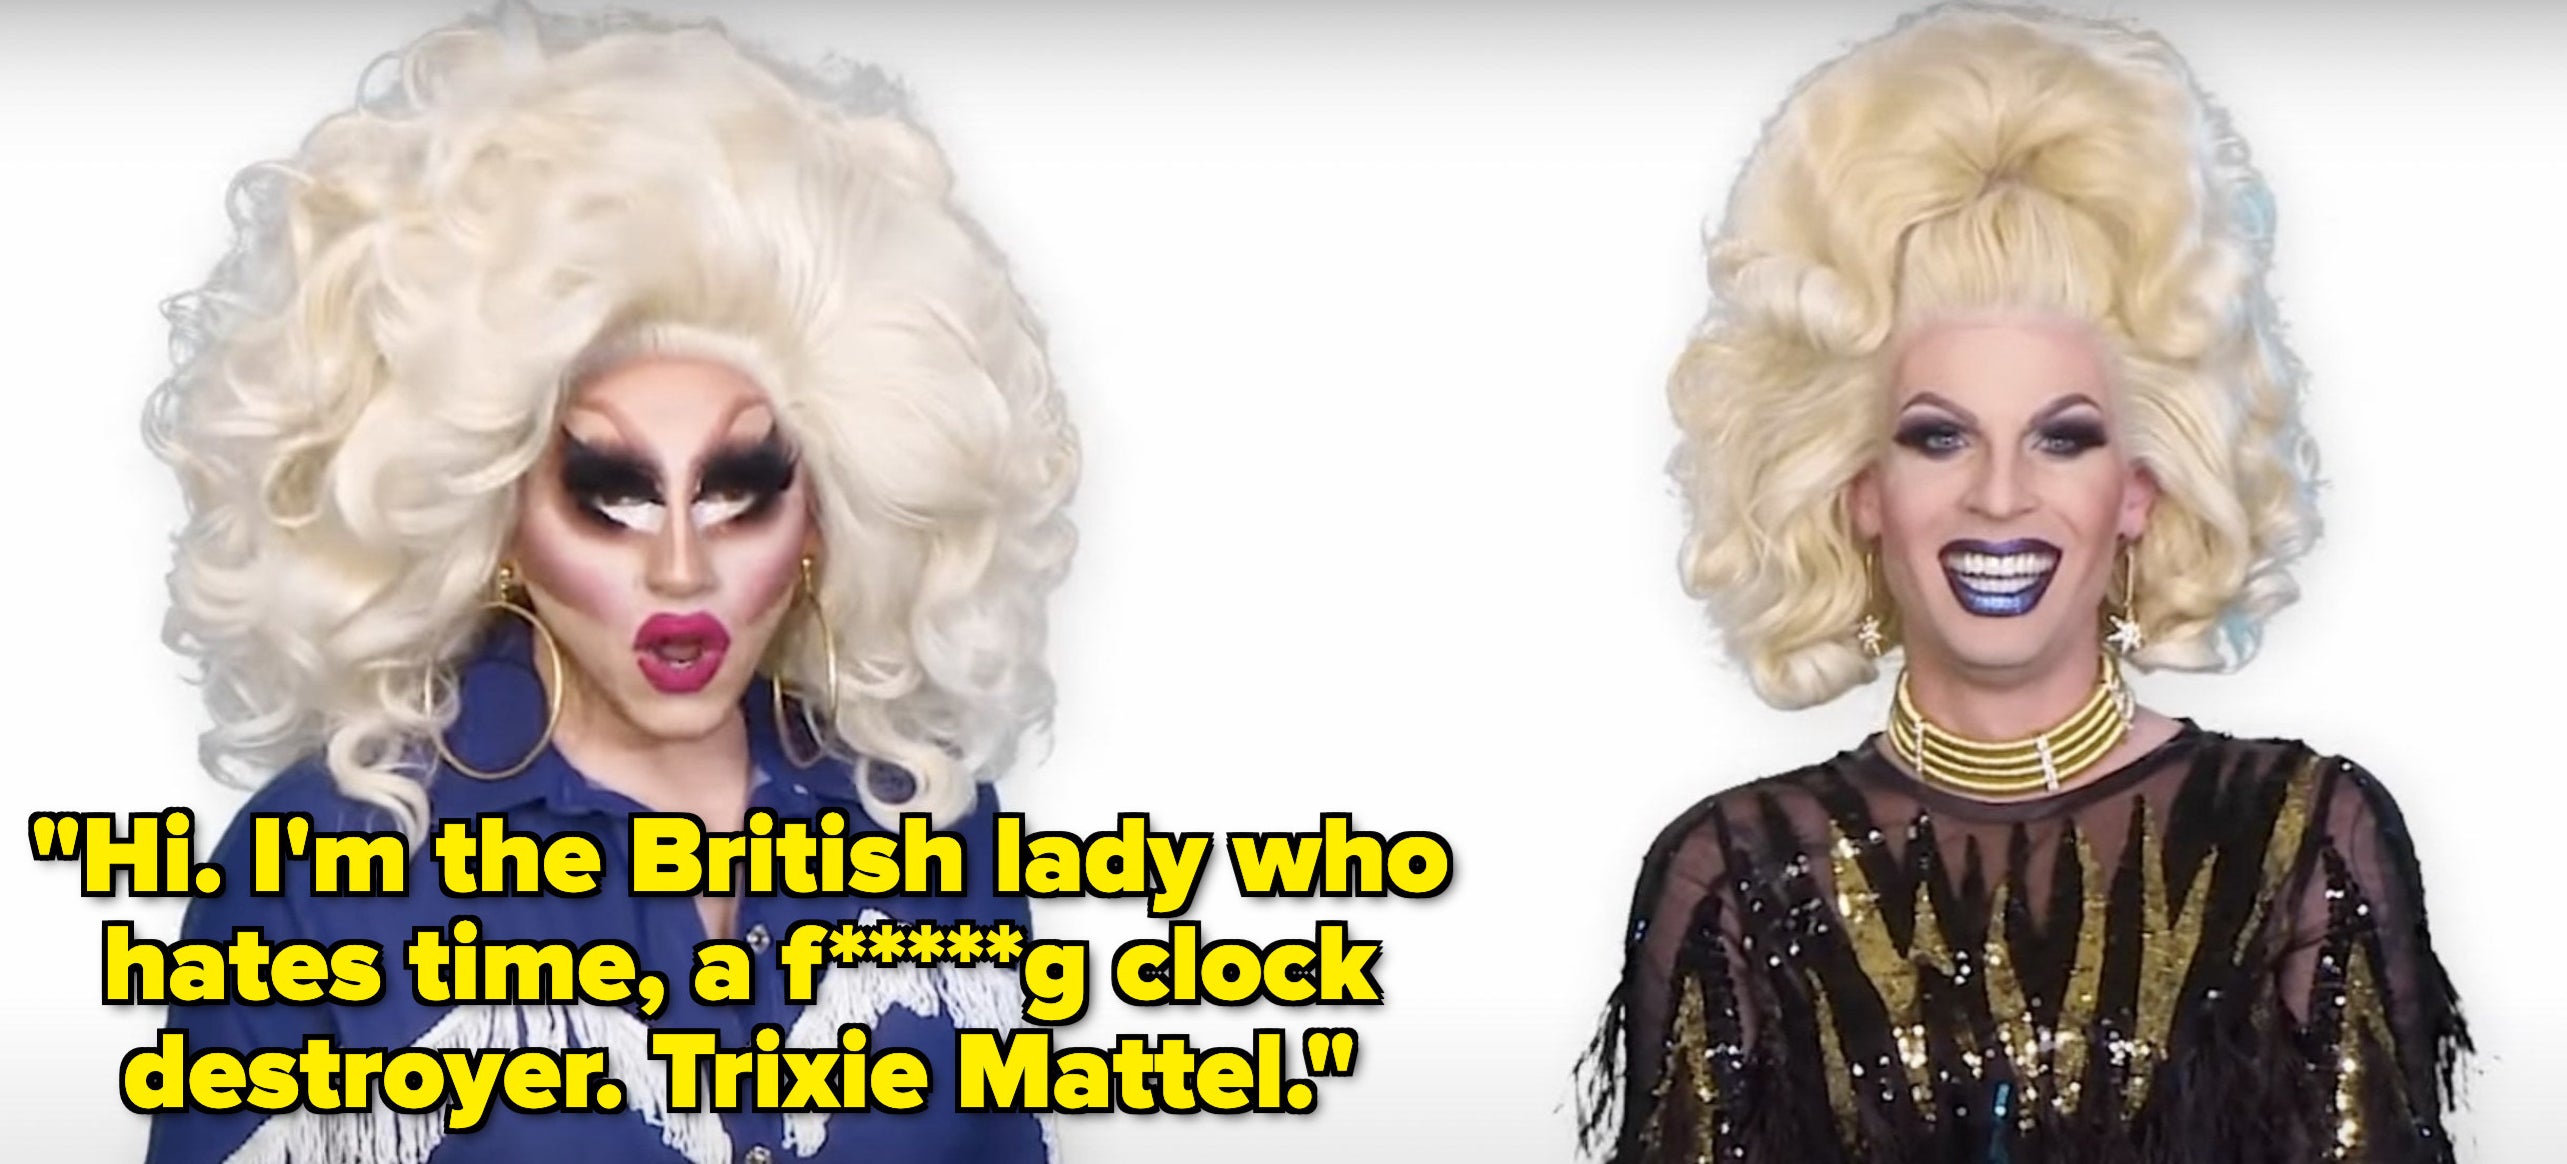 Trixie says, Hi, Im the British lady who hates time, an f ing clock destroyer, Trixie Mattel